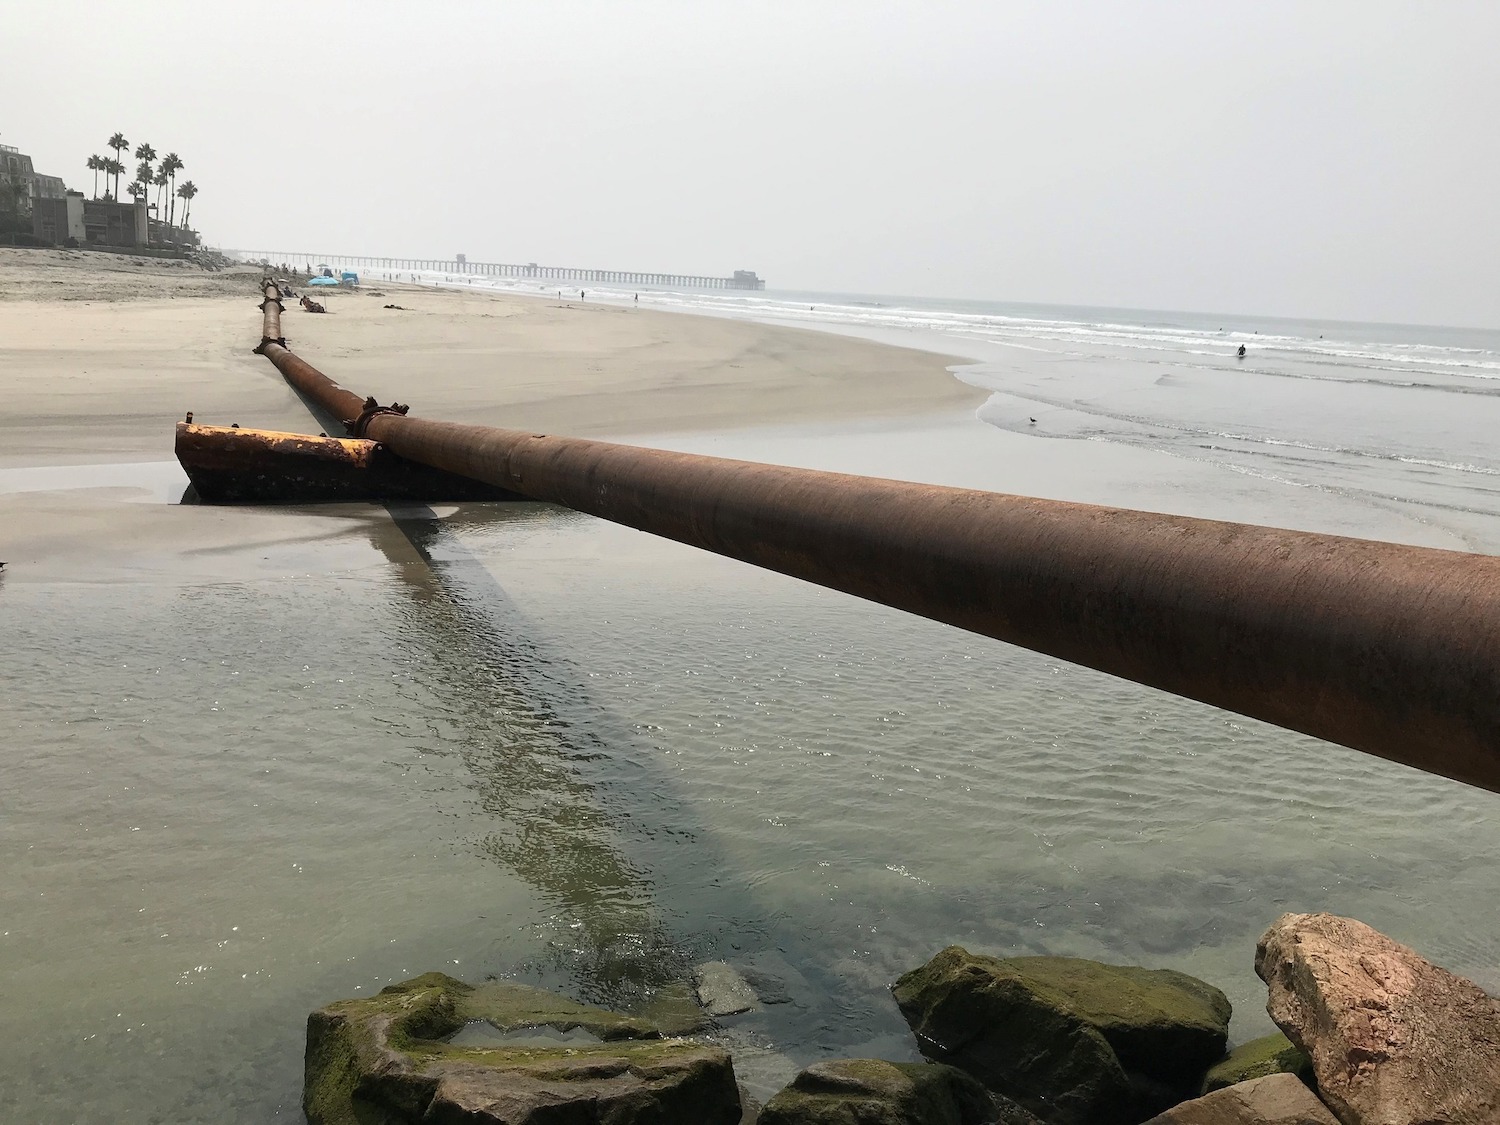 Large pipes at a San Diego beach in Oceanside where sand is transported and resupplied following erosion